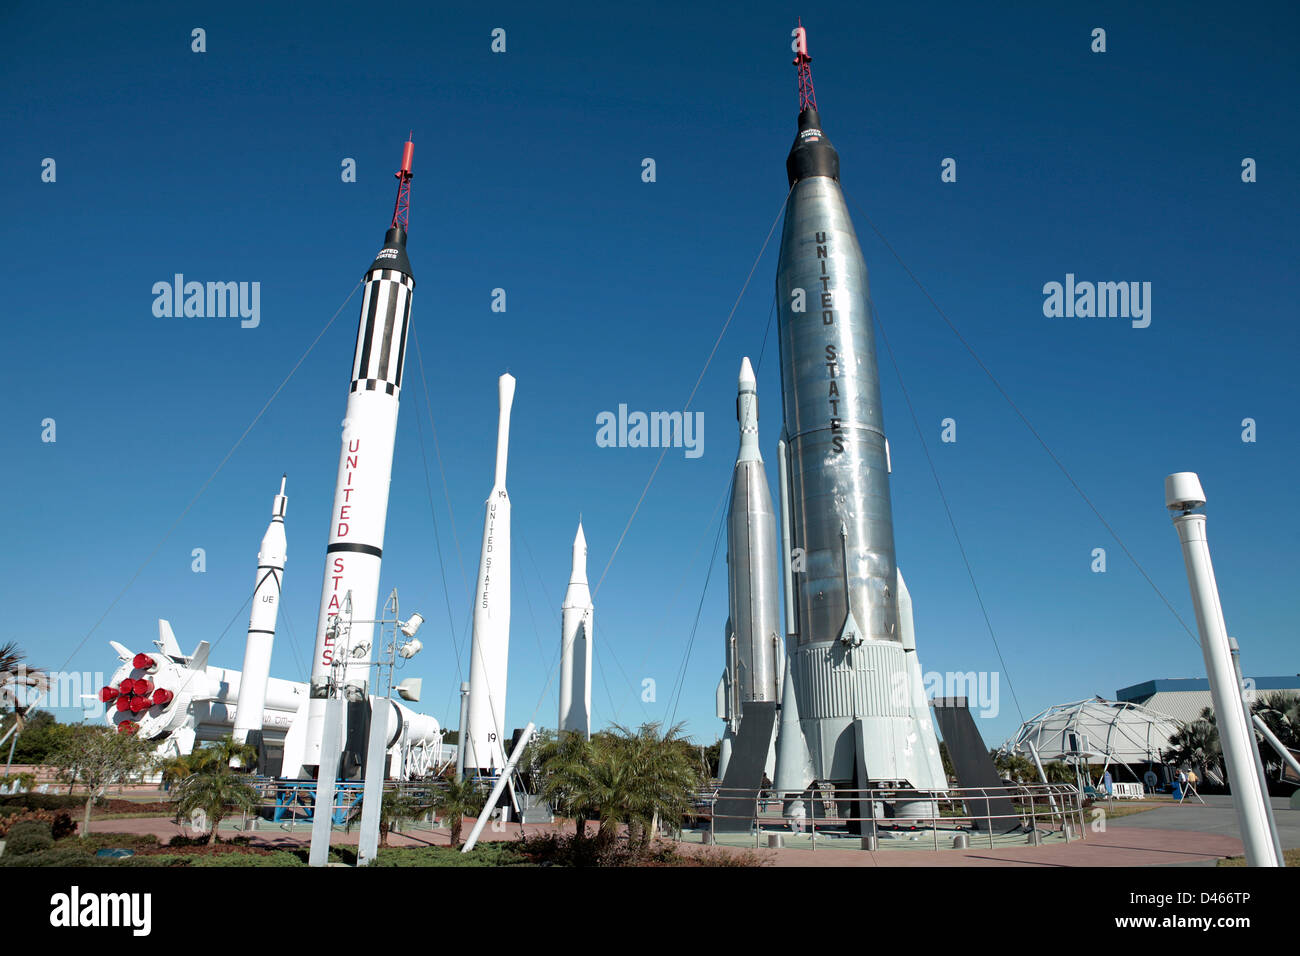 Rockets on display at the Kennedy Space center, Cape Canaveral, Florida Stock Photo